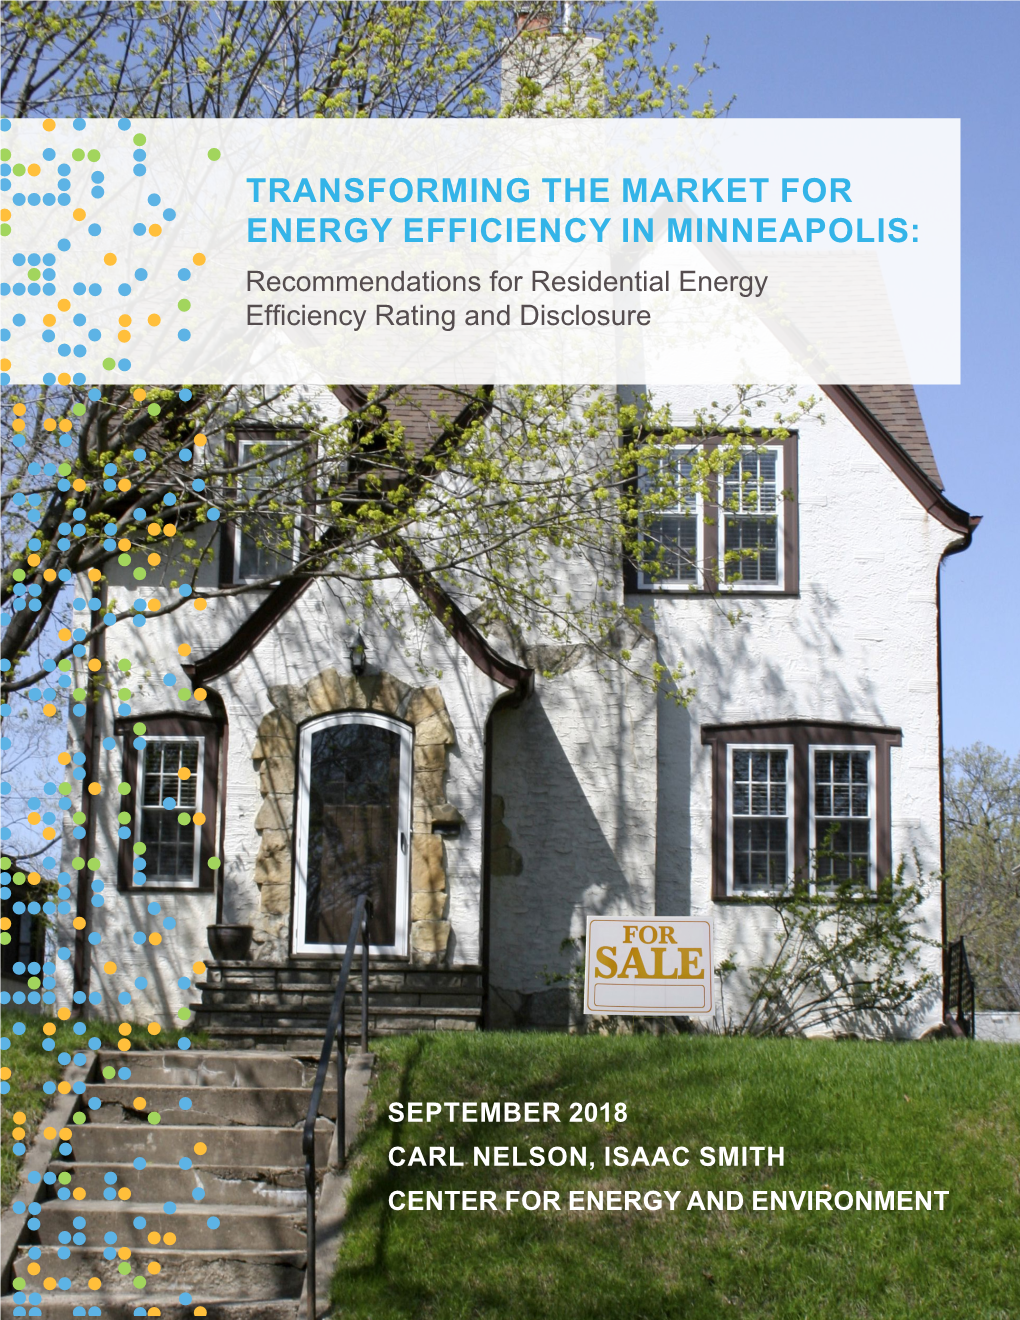 TRANSFORMING the MARKET for ENERGY EFFICIENCY in MINNEAPOLIS: Recommendations for Residential Energy Efficiency Rating and Disclosure